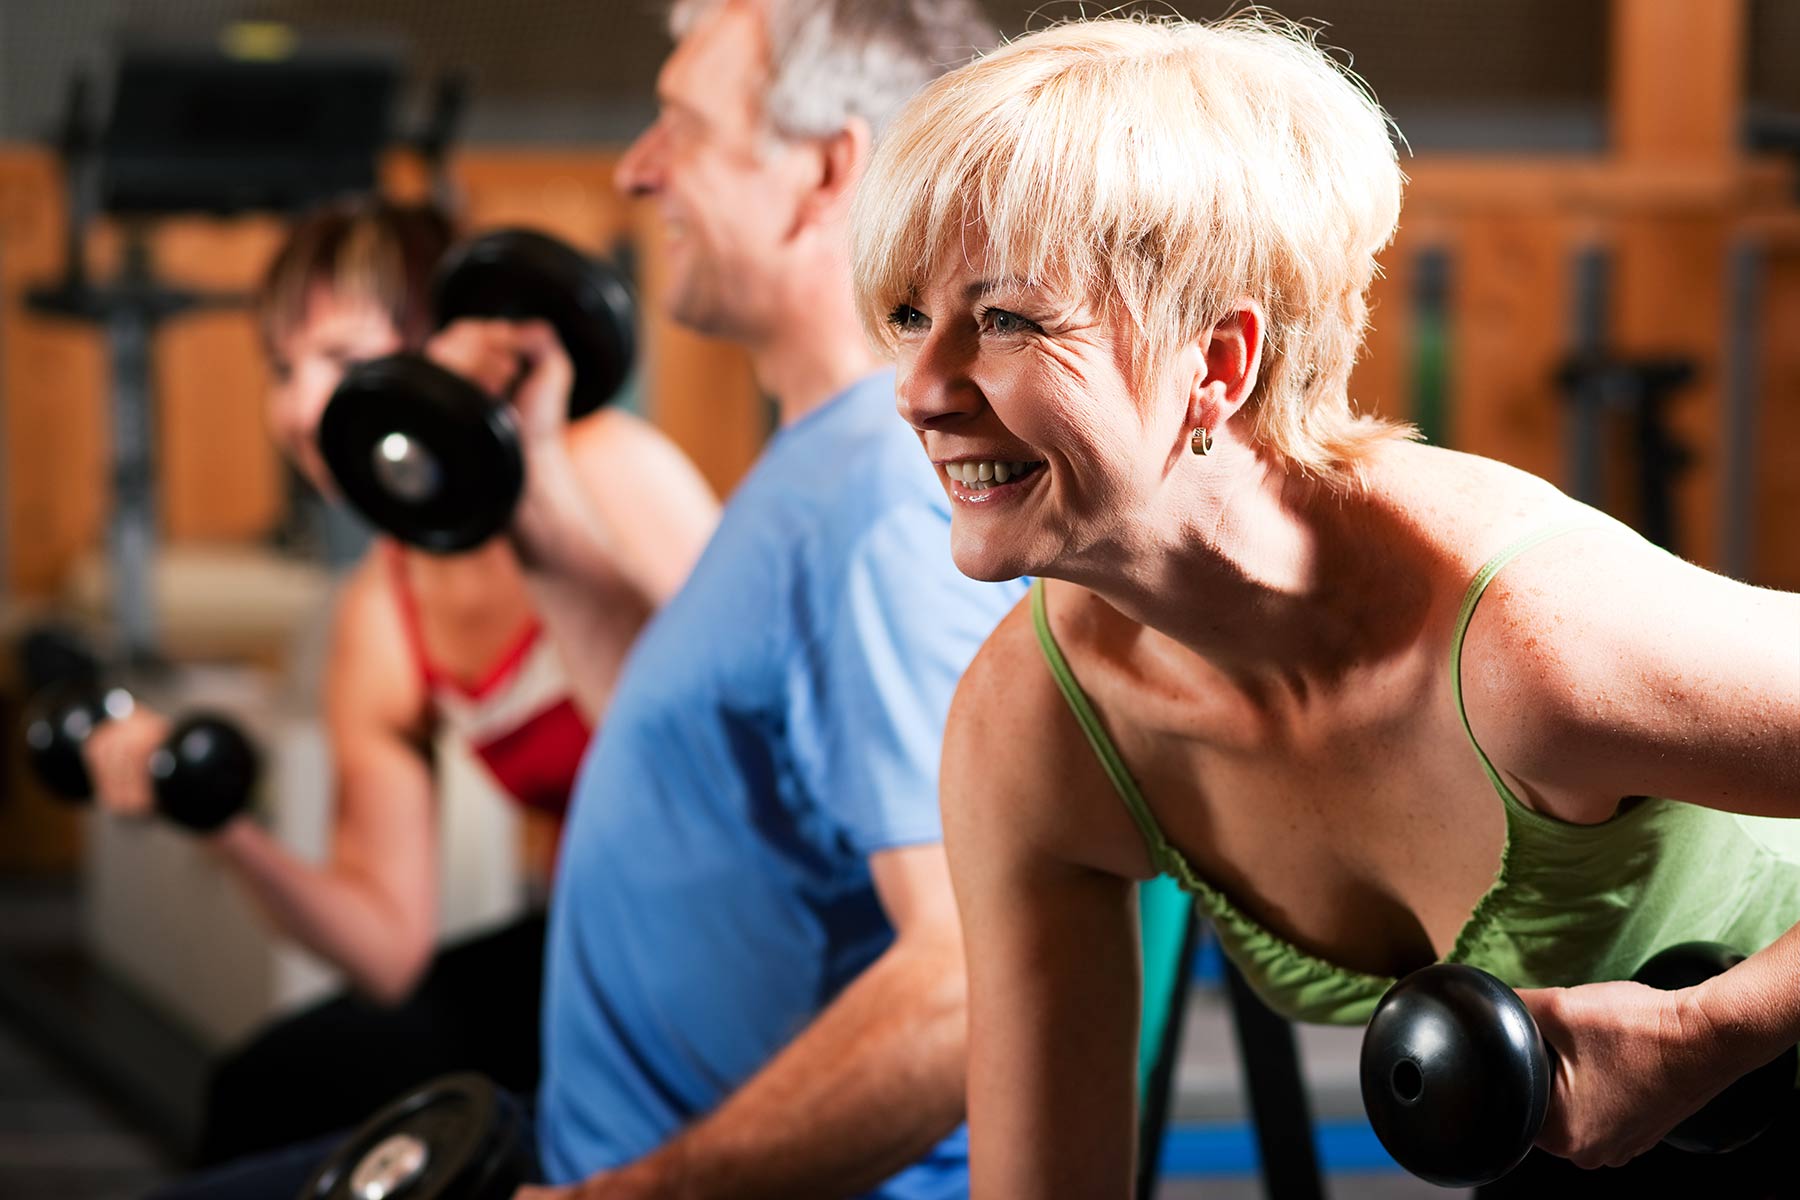 Finding a Personal Trainer for Over 50 near Me: Mission Impossible?